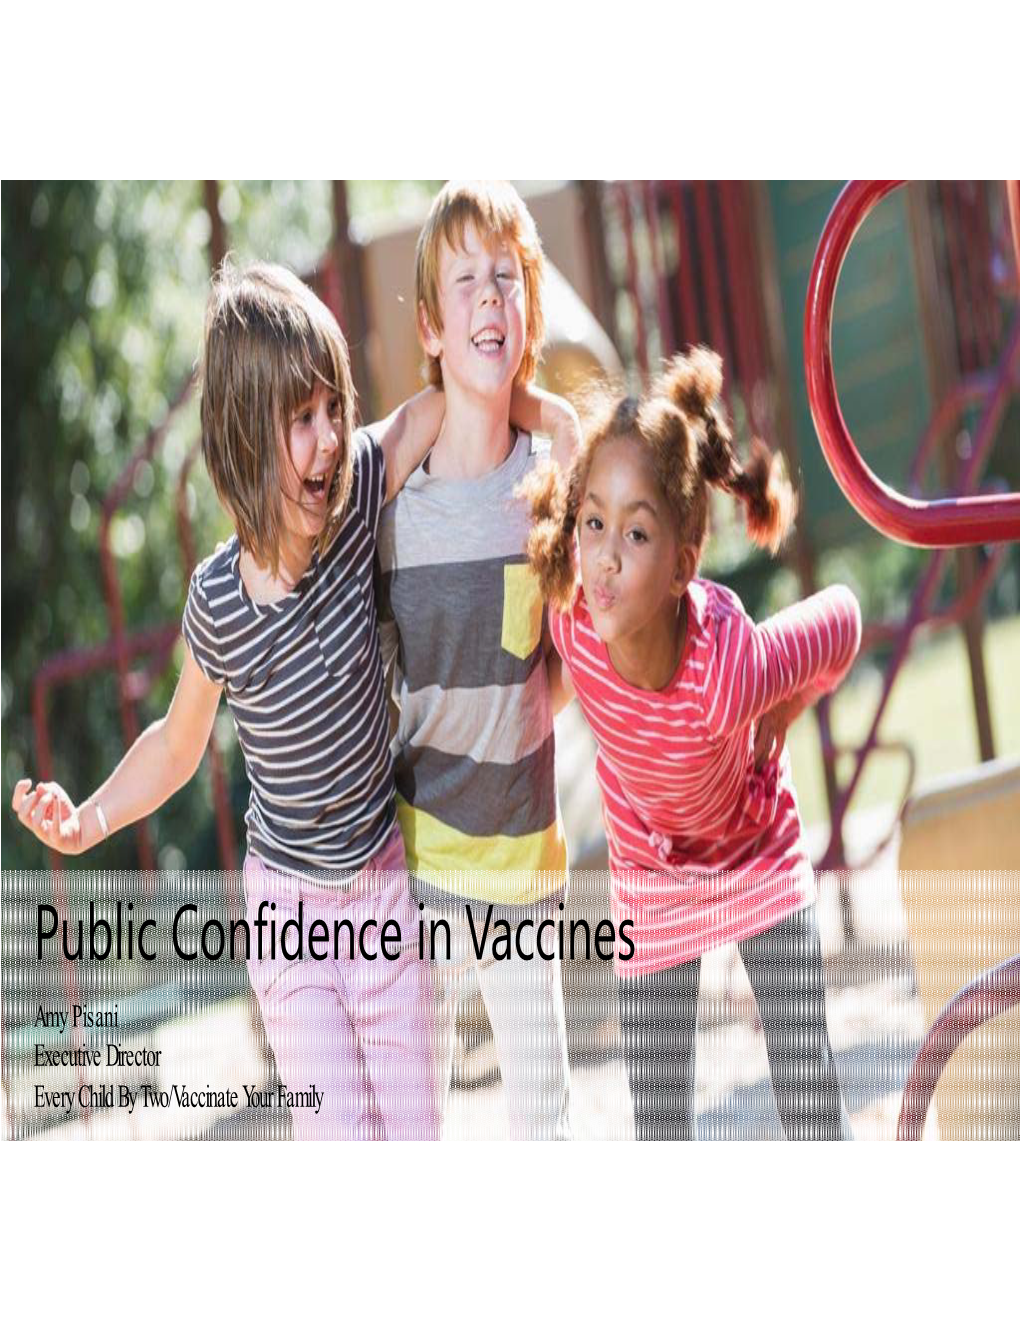 Public Confidence in Vaccines Amy Pisani Executive Director Every Child by Two/Vaccinate Your Family Wrap Up